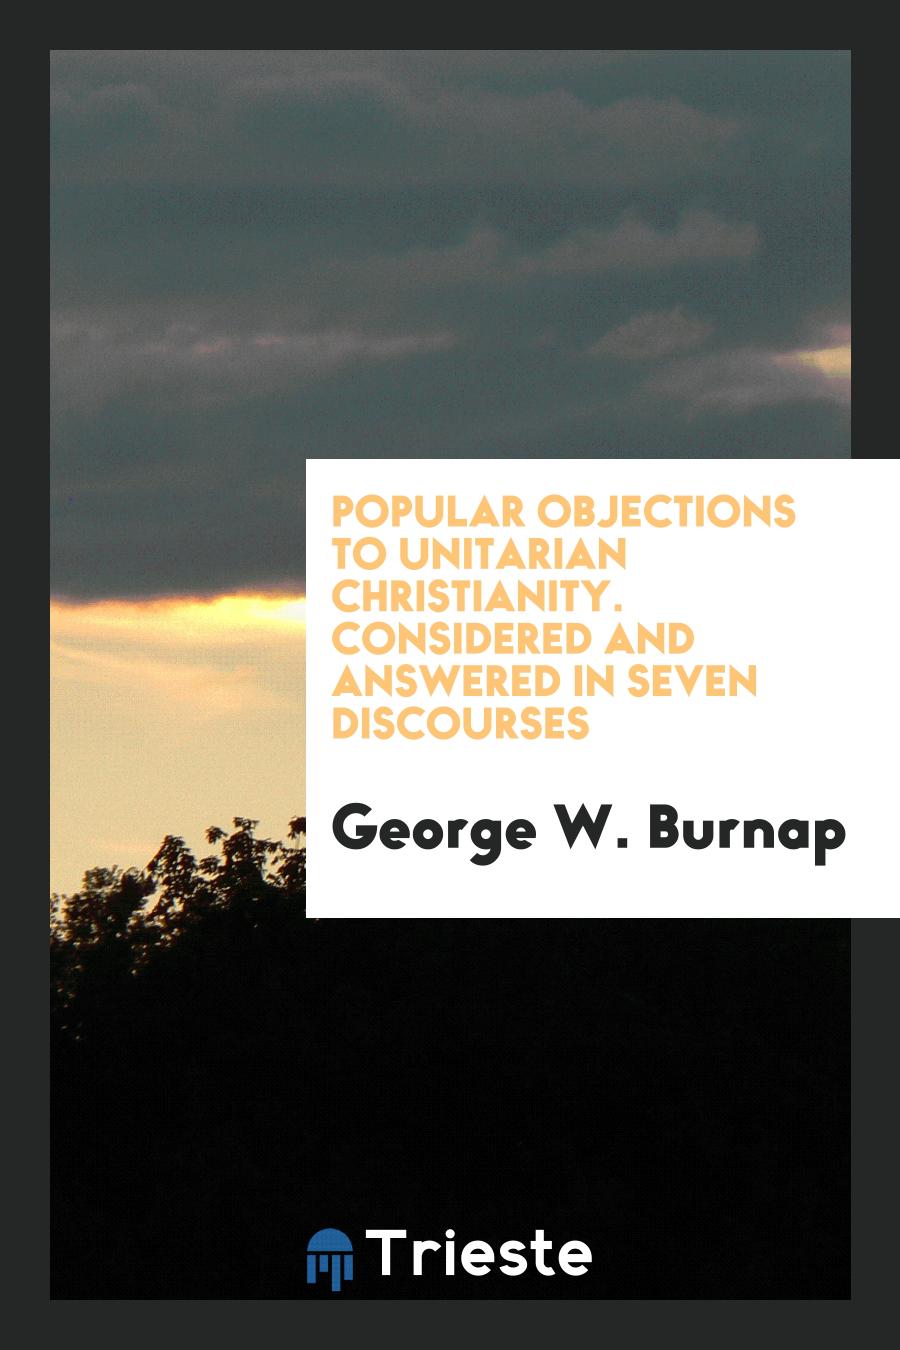 Popular Objections to Unitarian Christianity. Considered and Answered in Seven Discourses